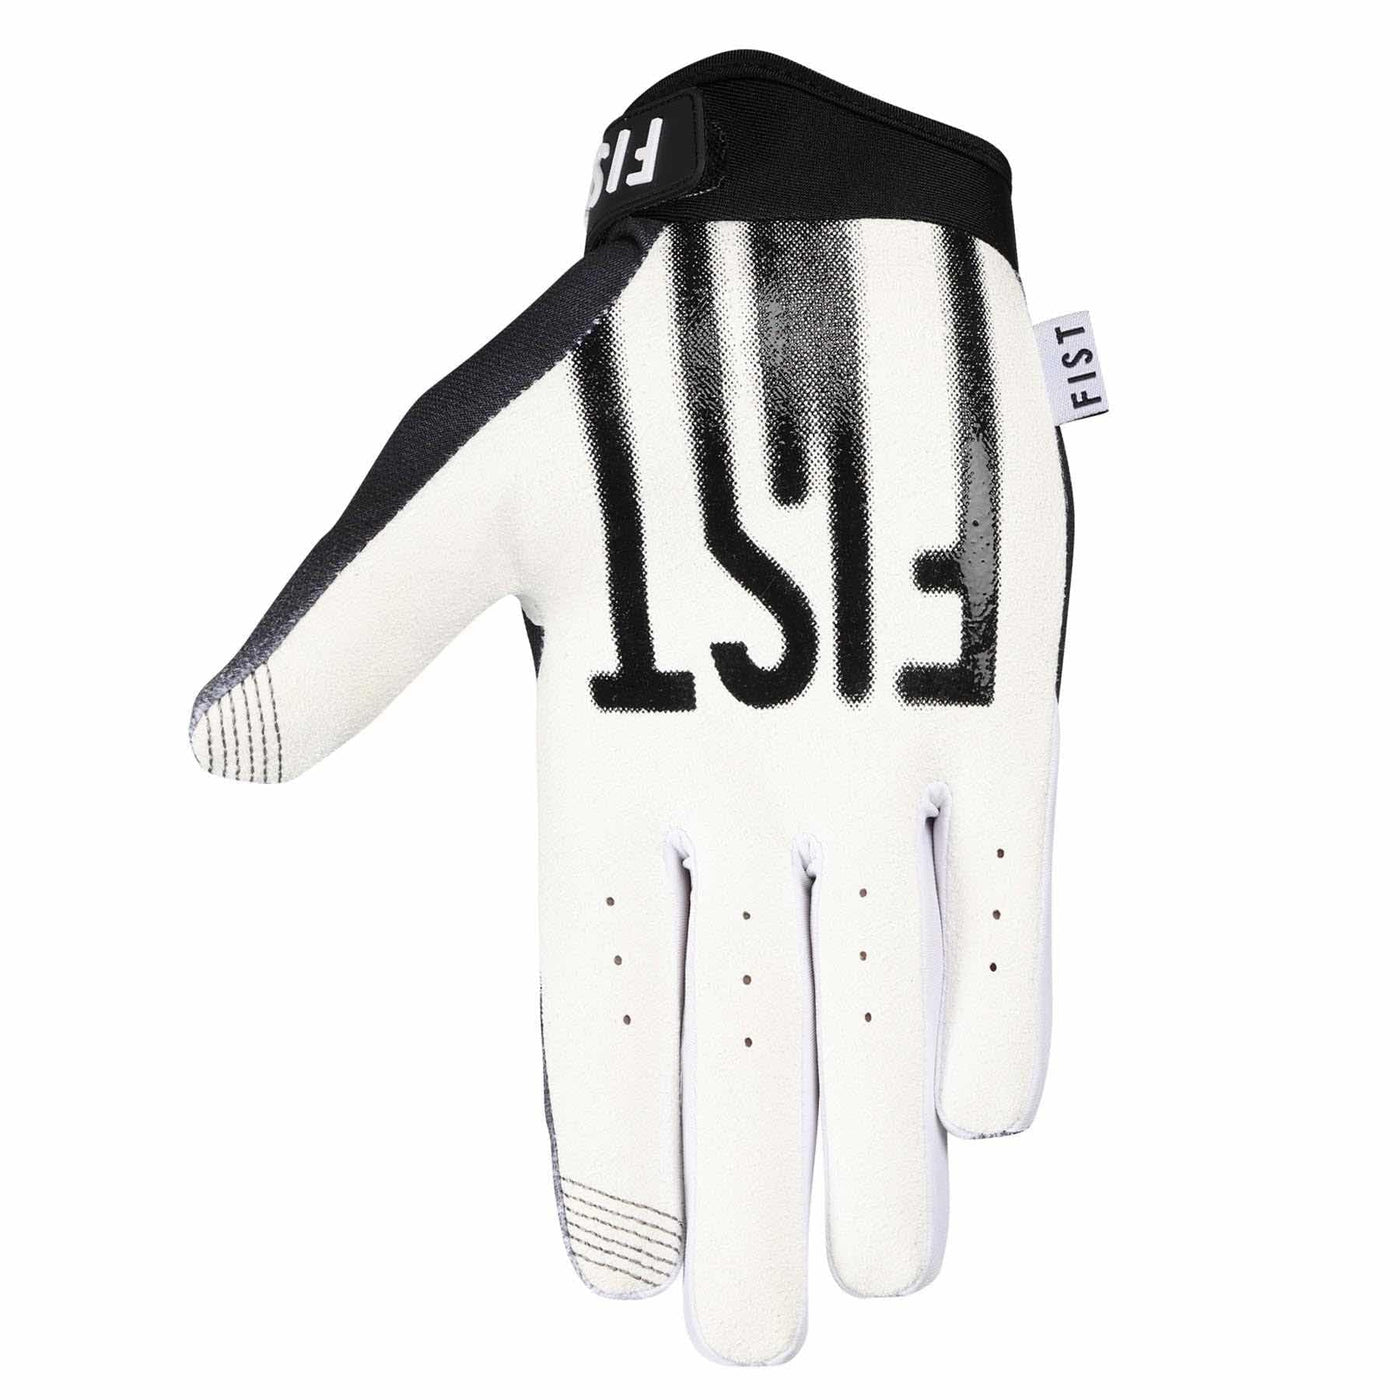 FIST Gloves - Blur 8Lines Shop - Fast Shipping